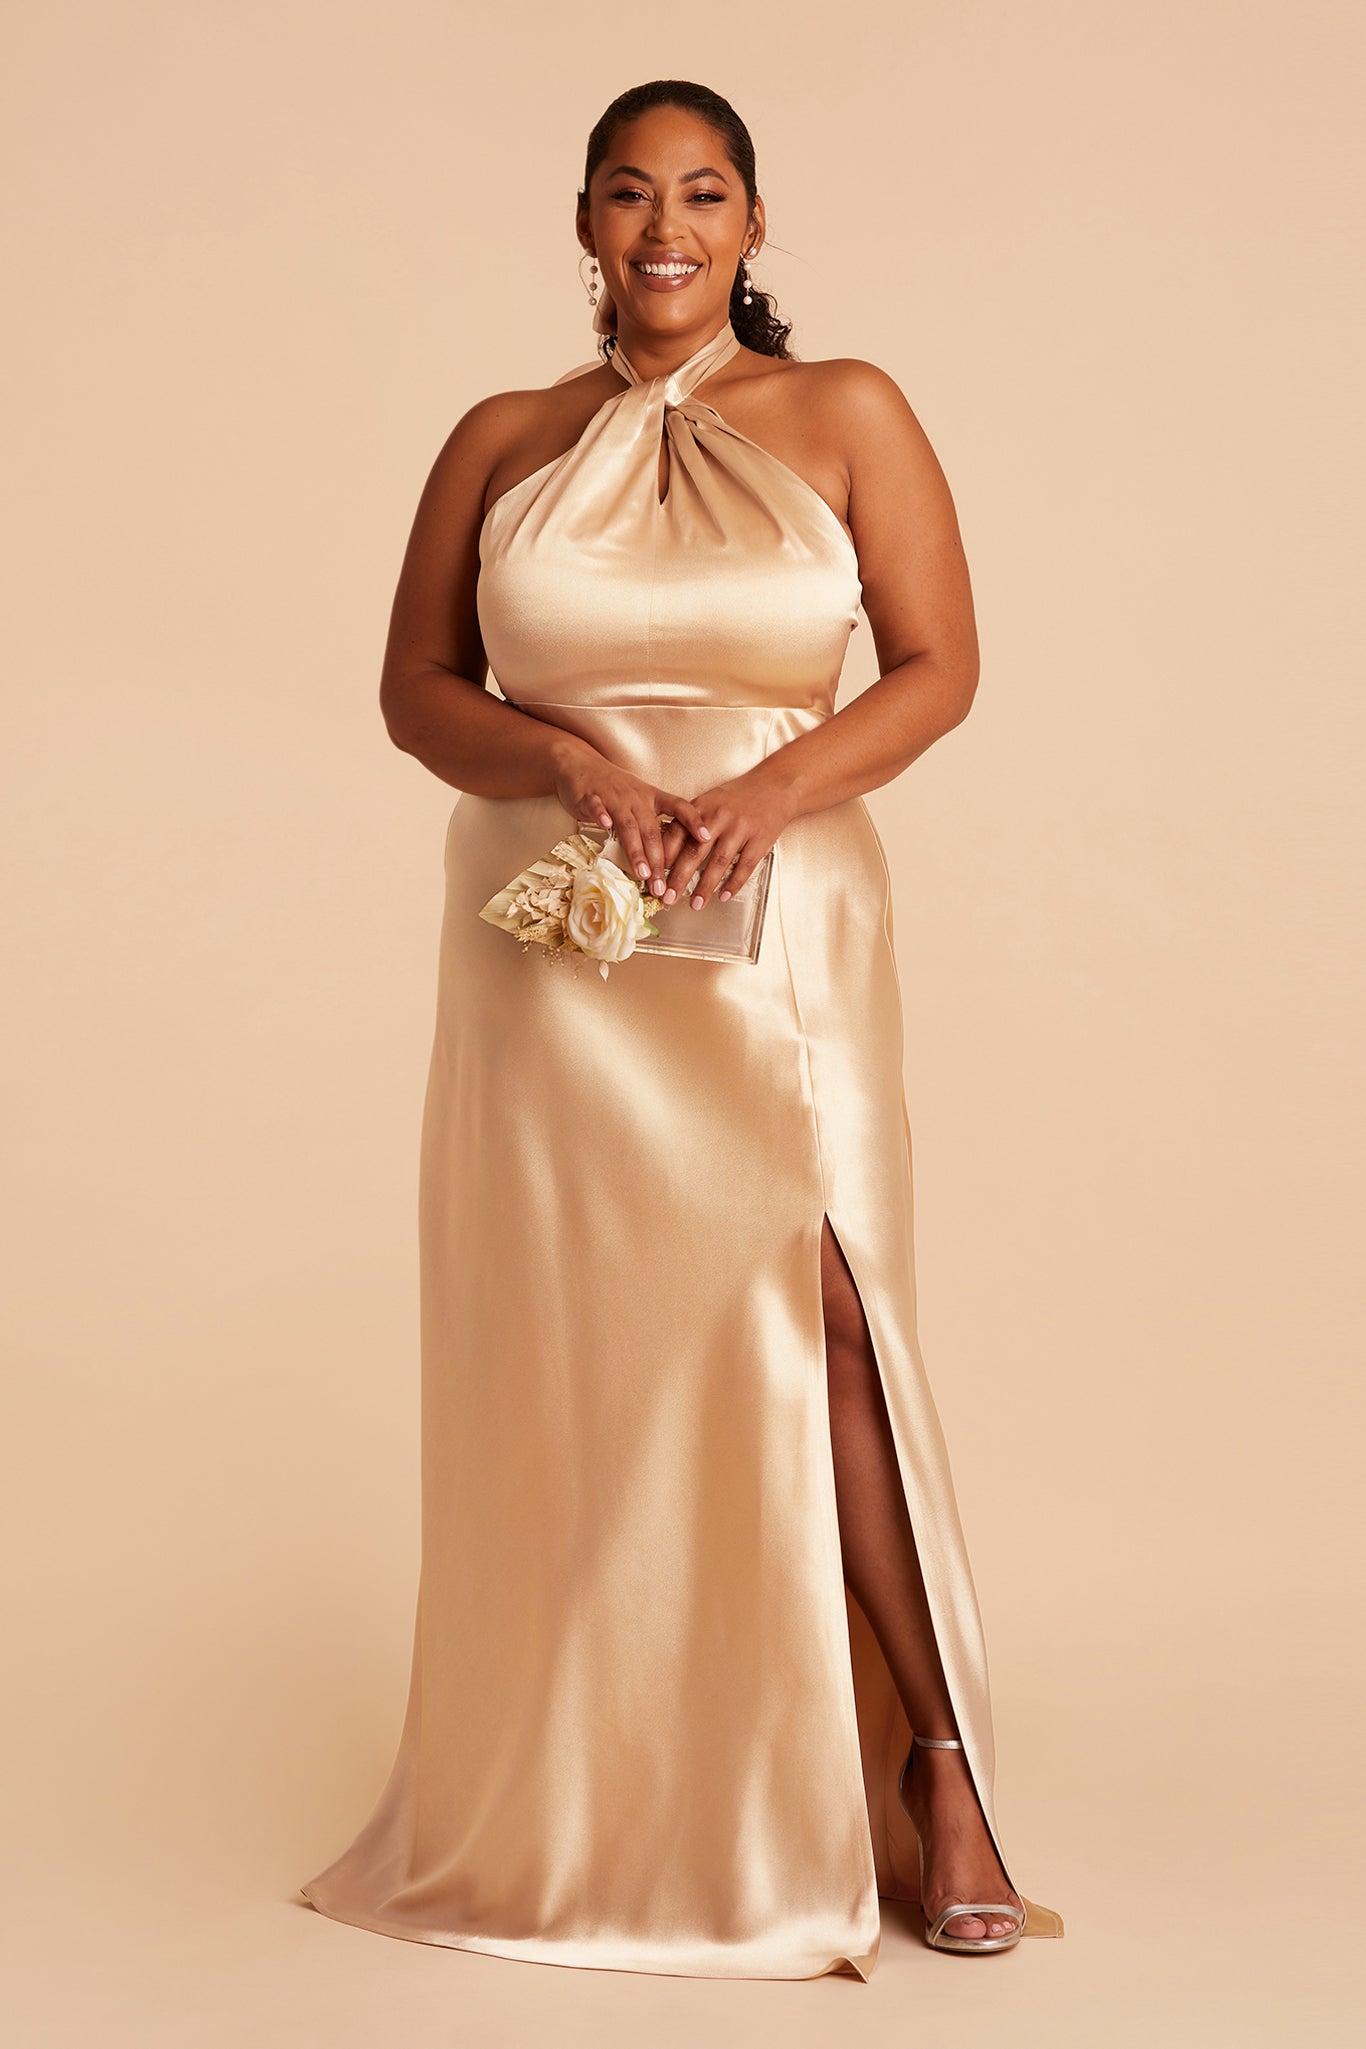 Monica Satin Dress Curve dress in gold satin by Birdy Grey, front view